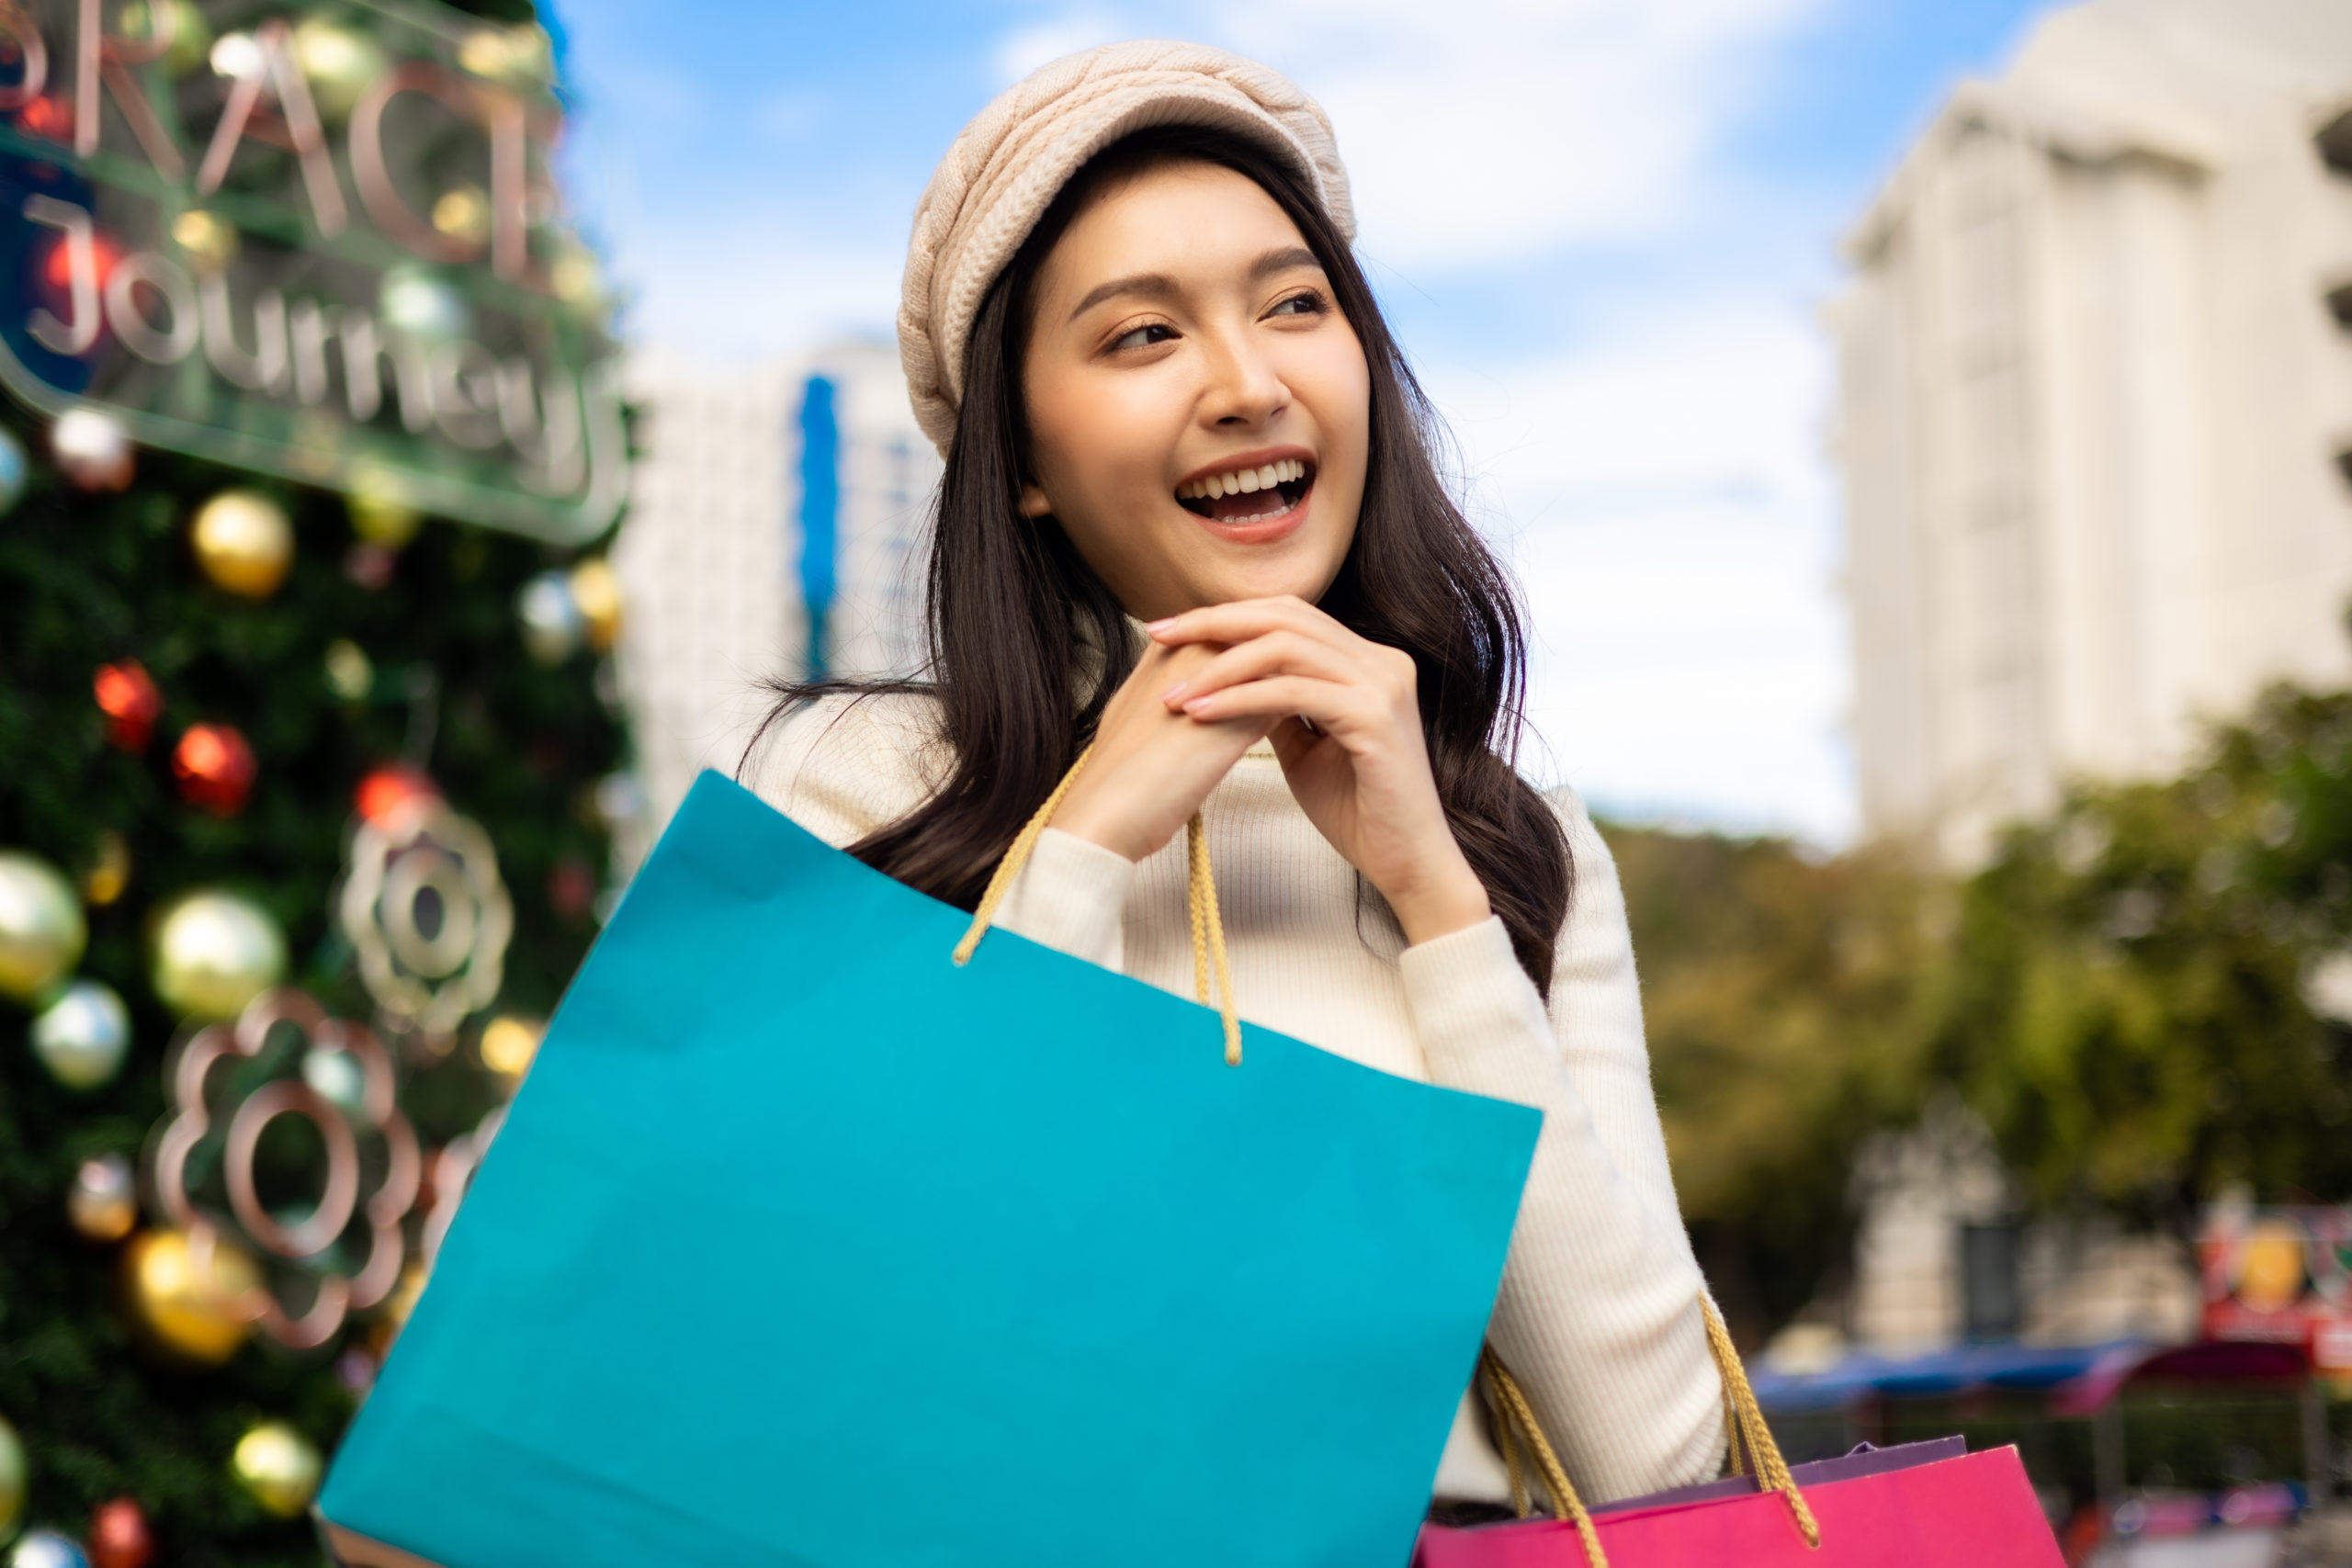 Shop Local: 5 Places to do Your Holiday Shopping in Greenville, SC